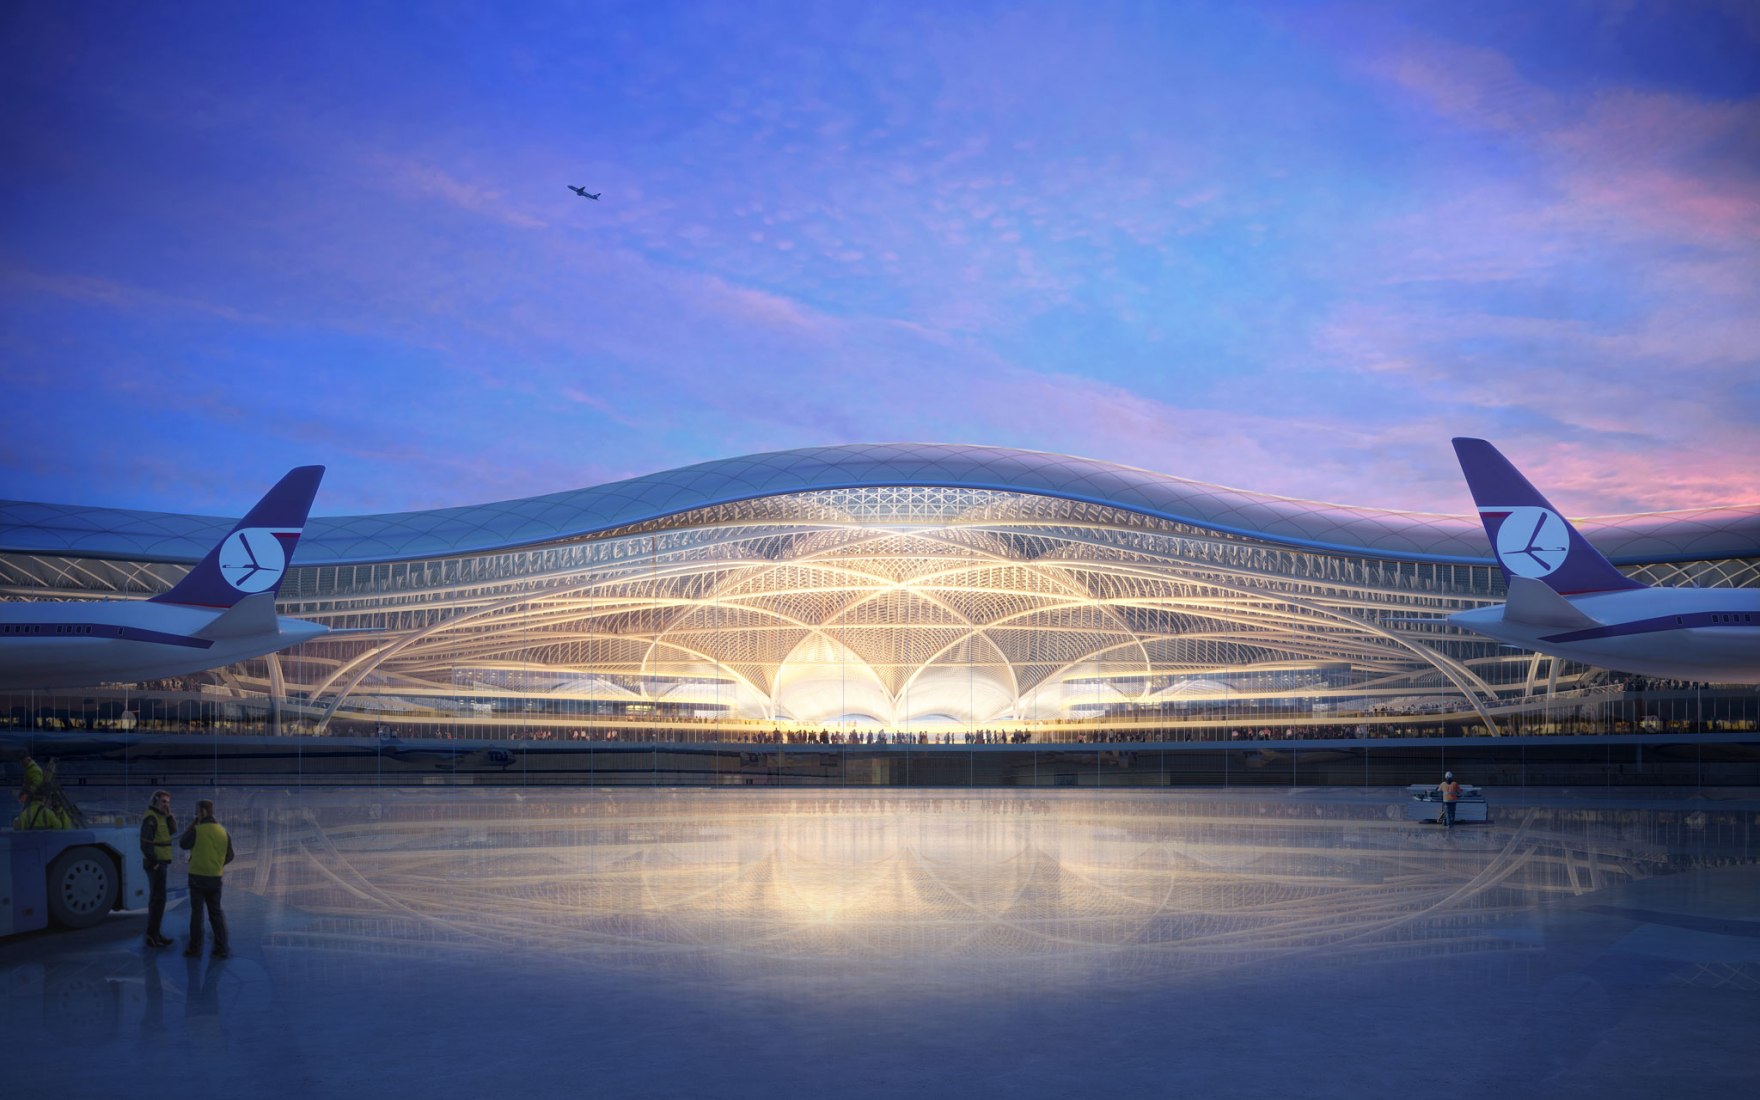 The pivotal project will act as a symbolic gateway to Poland. CPK Airport, Poland by Foster + Partners.